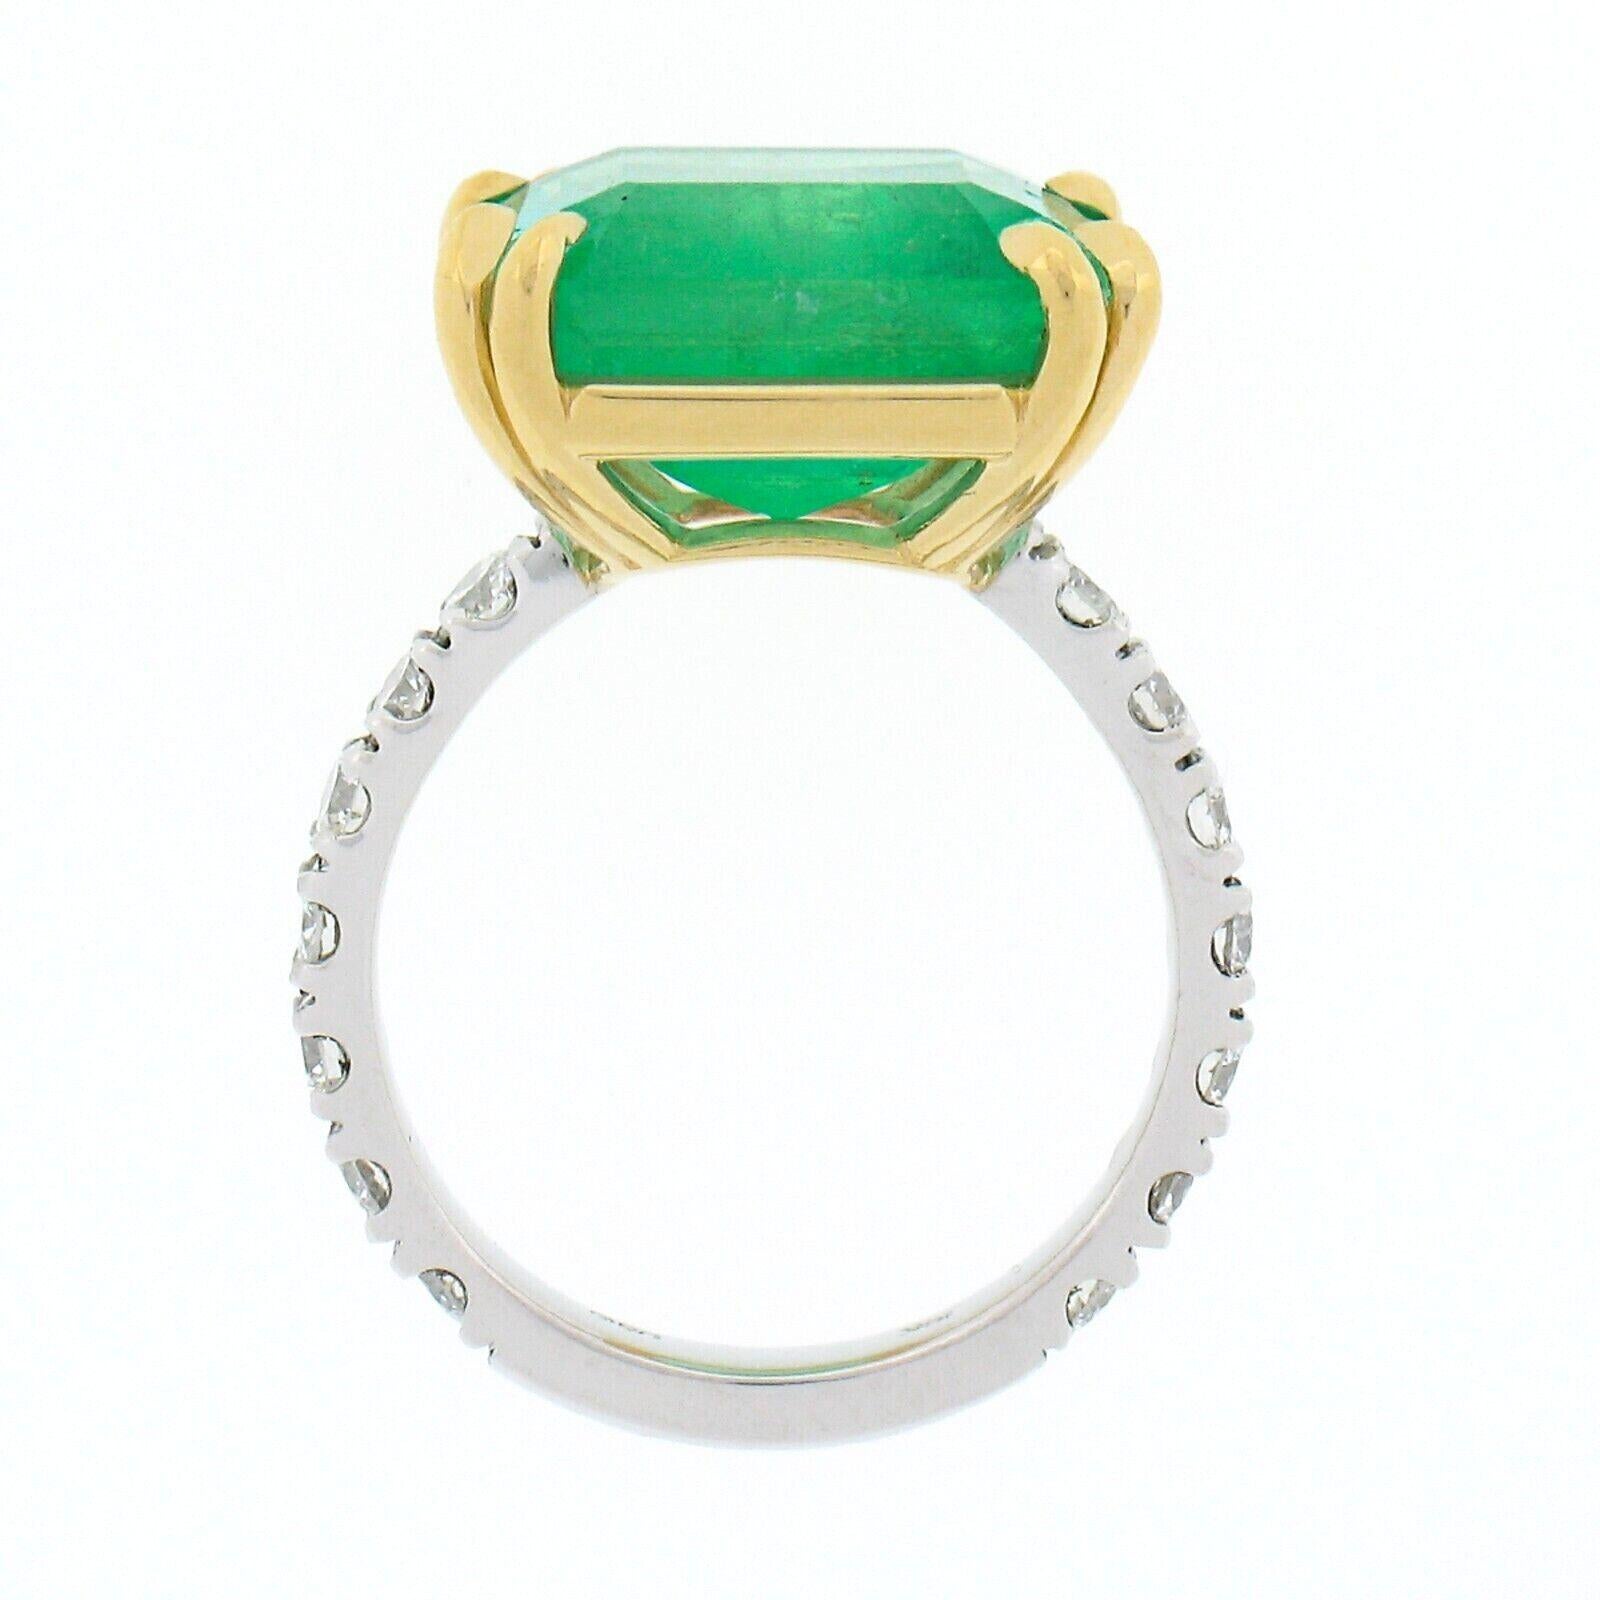 New 18k Gold AGL 10.54ct Colombian Emerald Cocktail Ring w/ Pave Diamond Shank For Sale 1